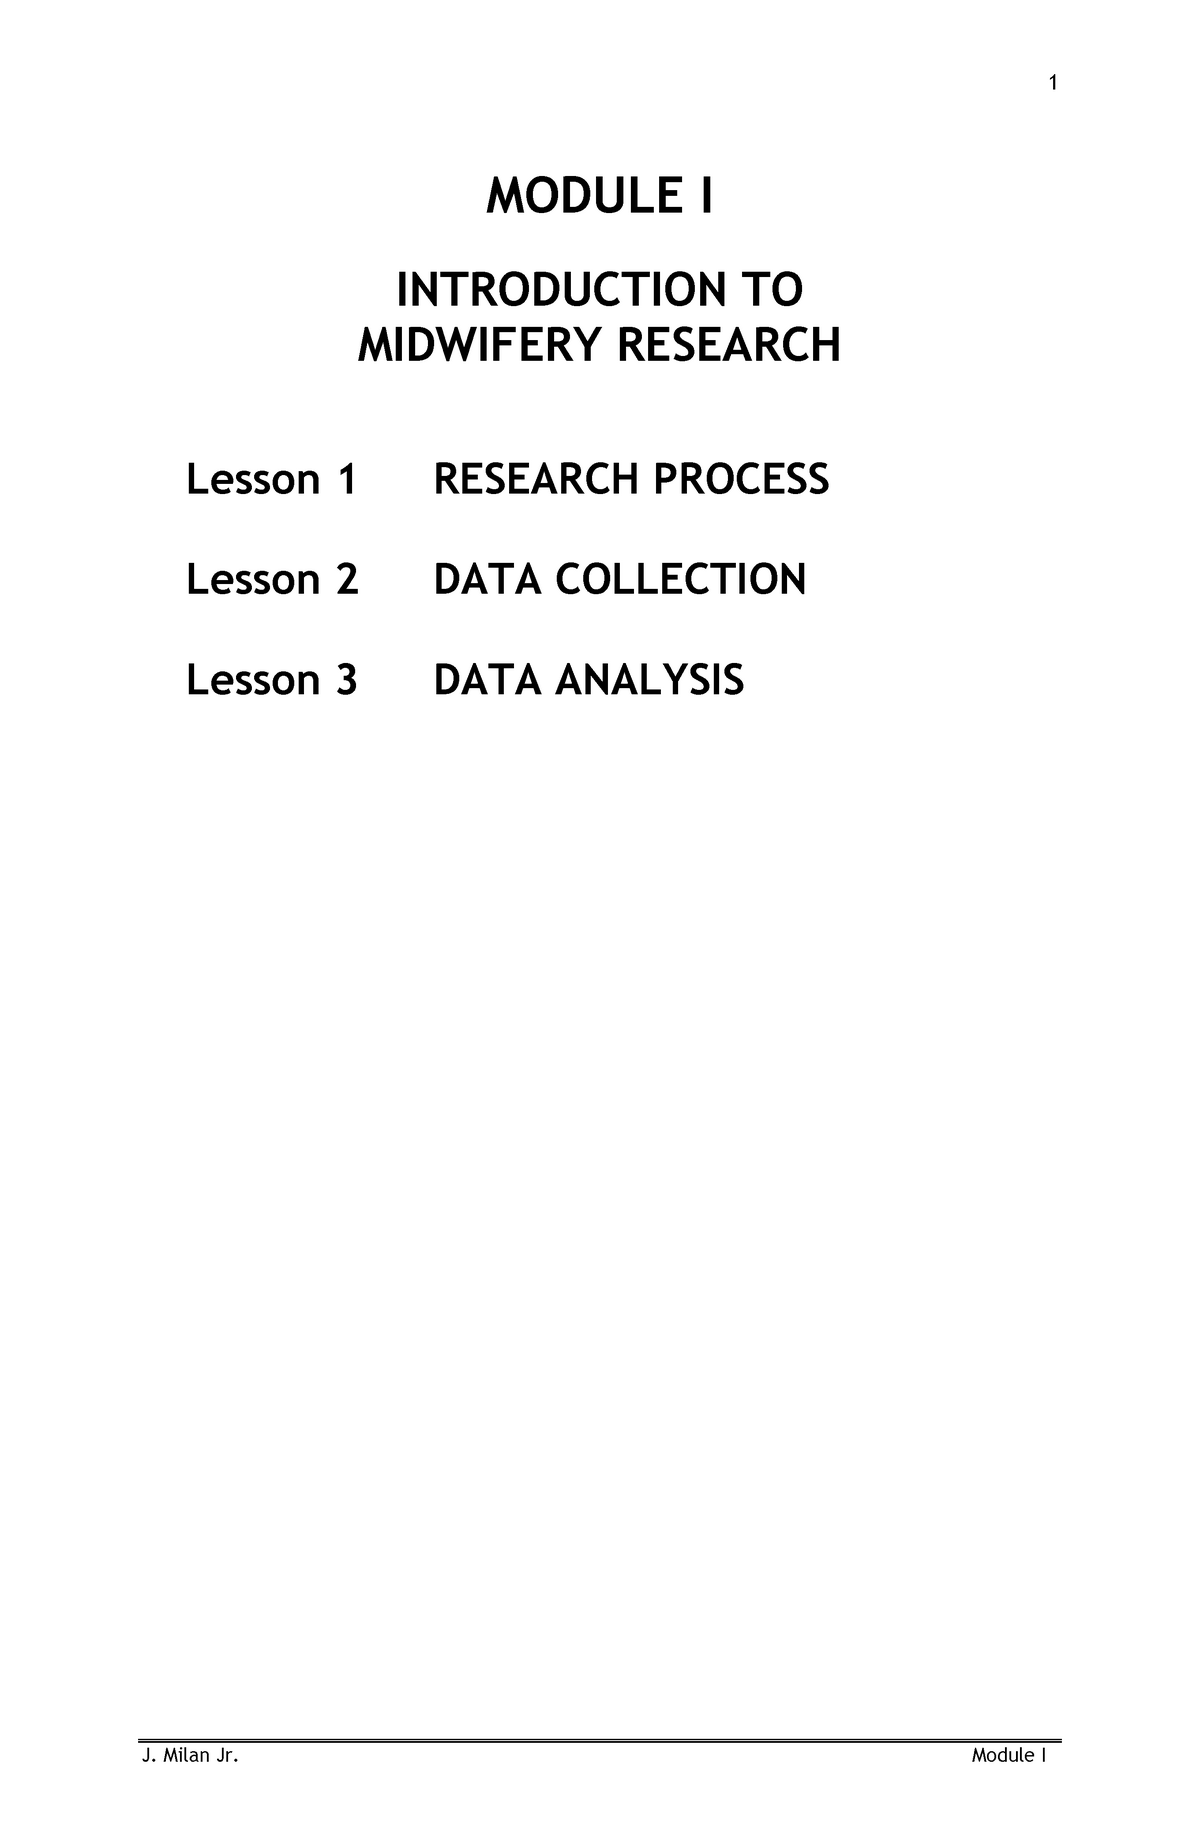 research project topics in midwifery